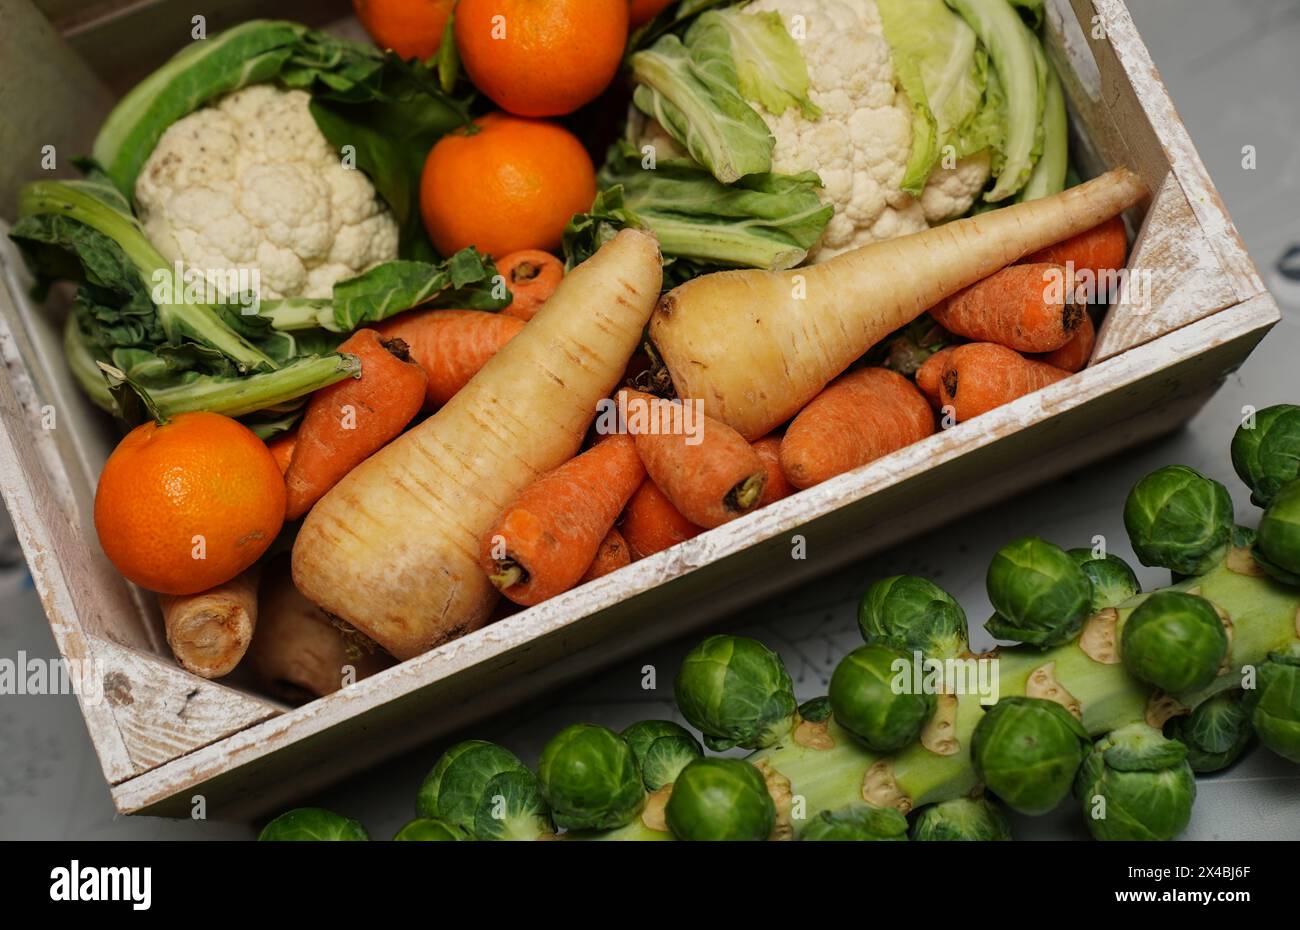 File photo dated 22/12/23 of a crate of fresh fruit and vegetables, including carrots, cauliflower, parsnips, brussel sprouts, apples, and oranges. A diet rich in plant-based foods such as vegetables, lentils, fruit, nuts and whole grains may help people with cancer live longer, studies suggest. A review published as four separate studies in the International Journal of Cancer (IJC) suggests a plant-based diet, along with an active lifestyle, could potentially improve the overall survival chances of patients with bowel cancer. Issue date: Thursday May 2, 2024. Stock Photo